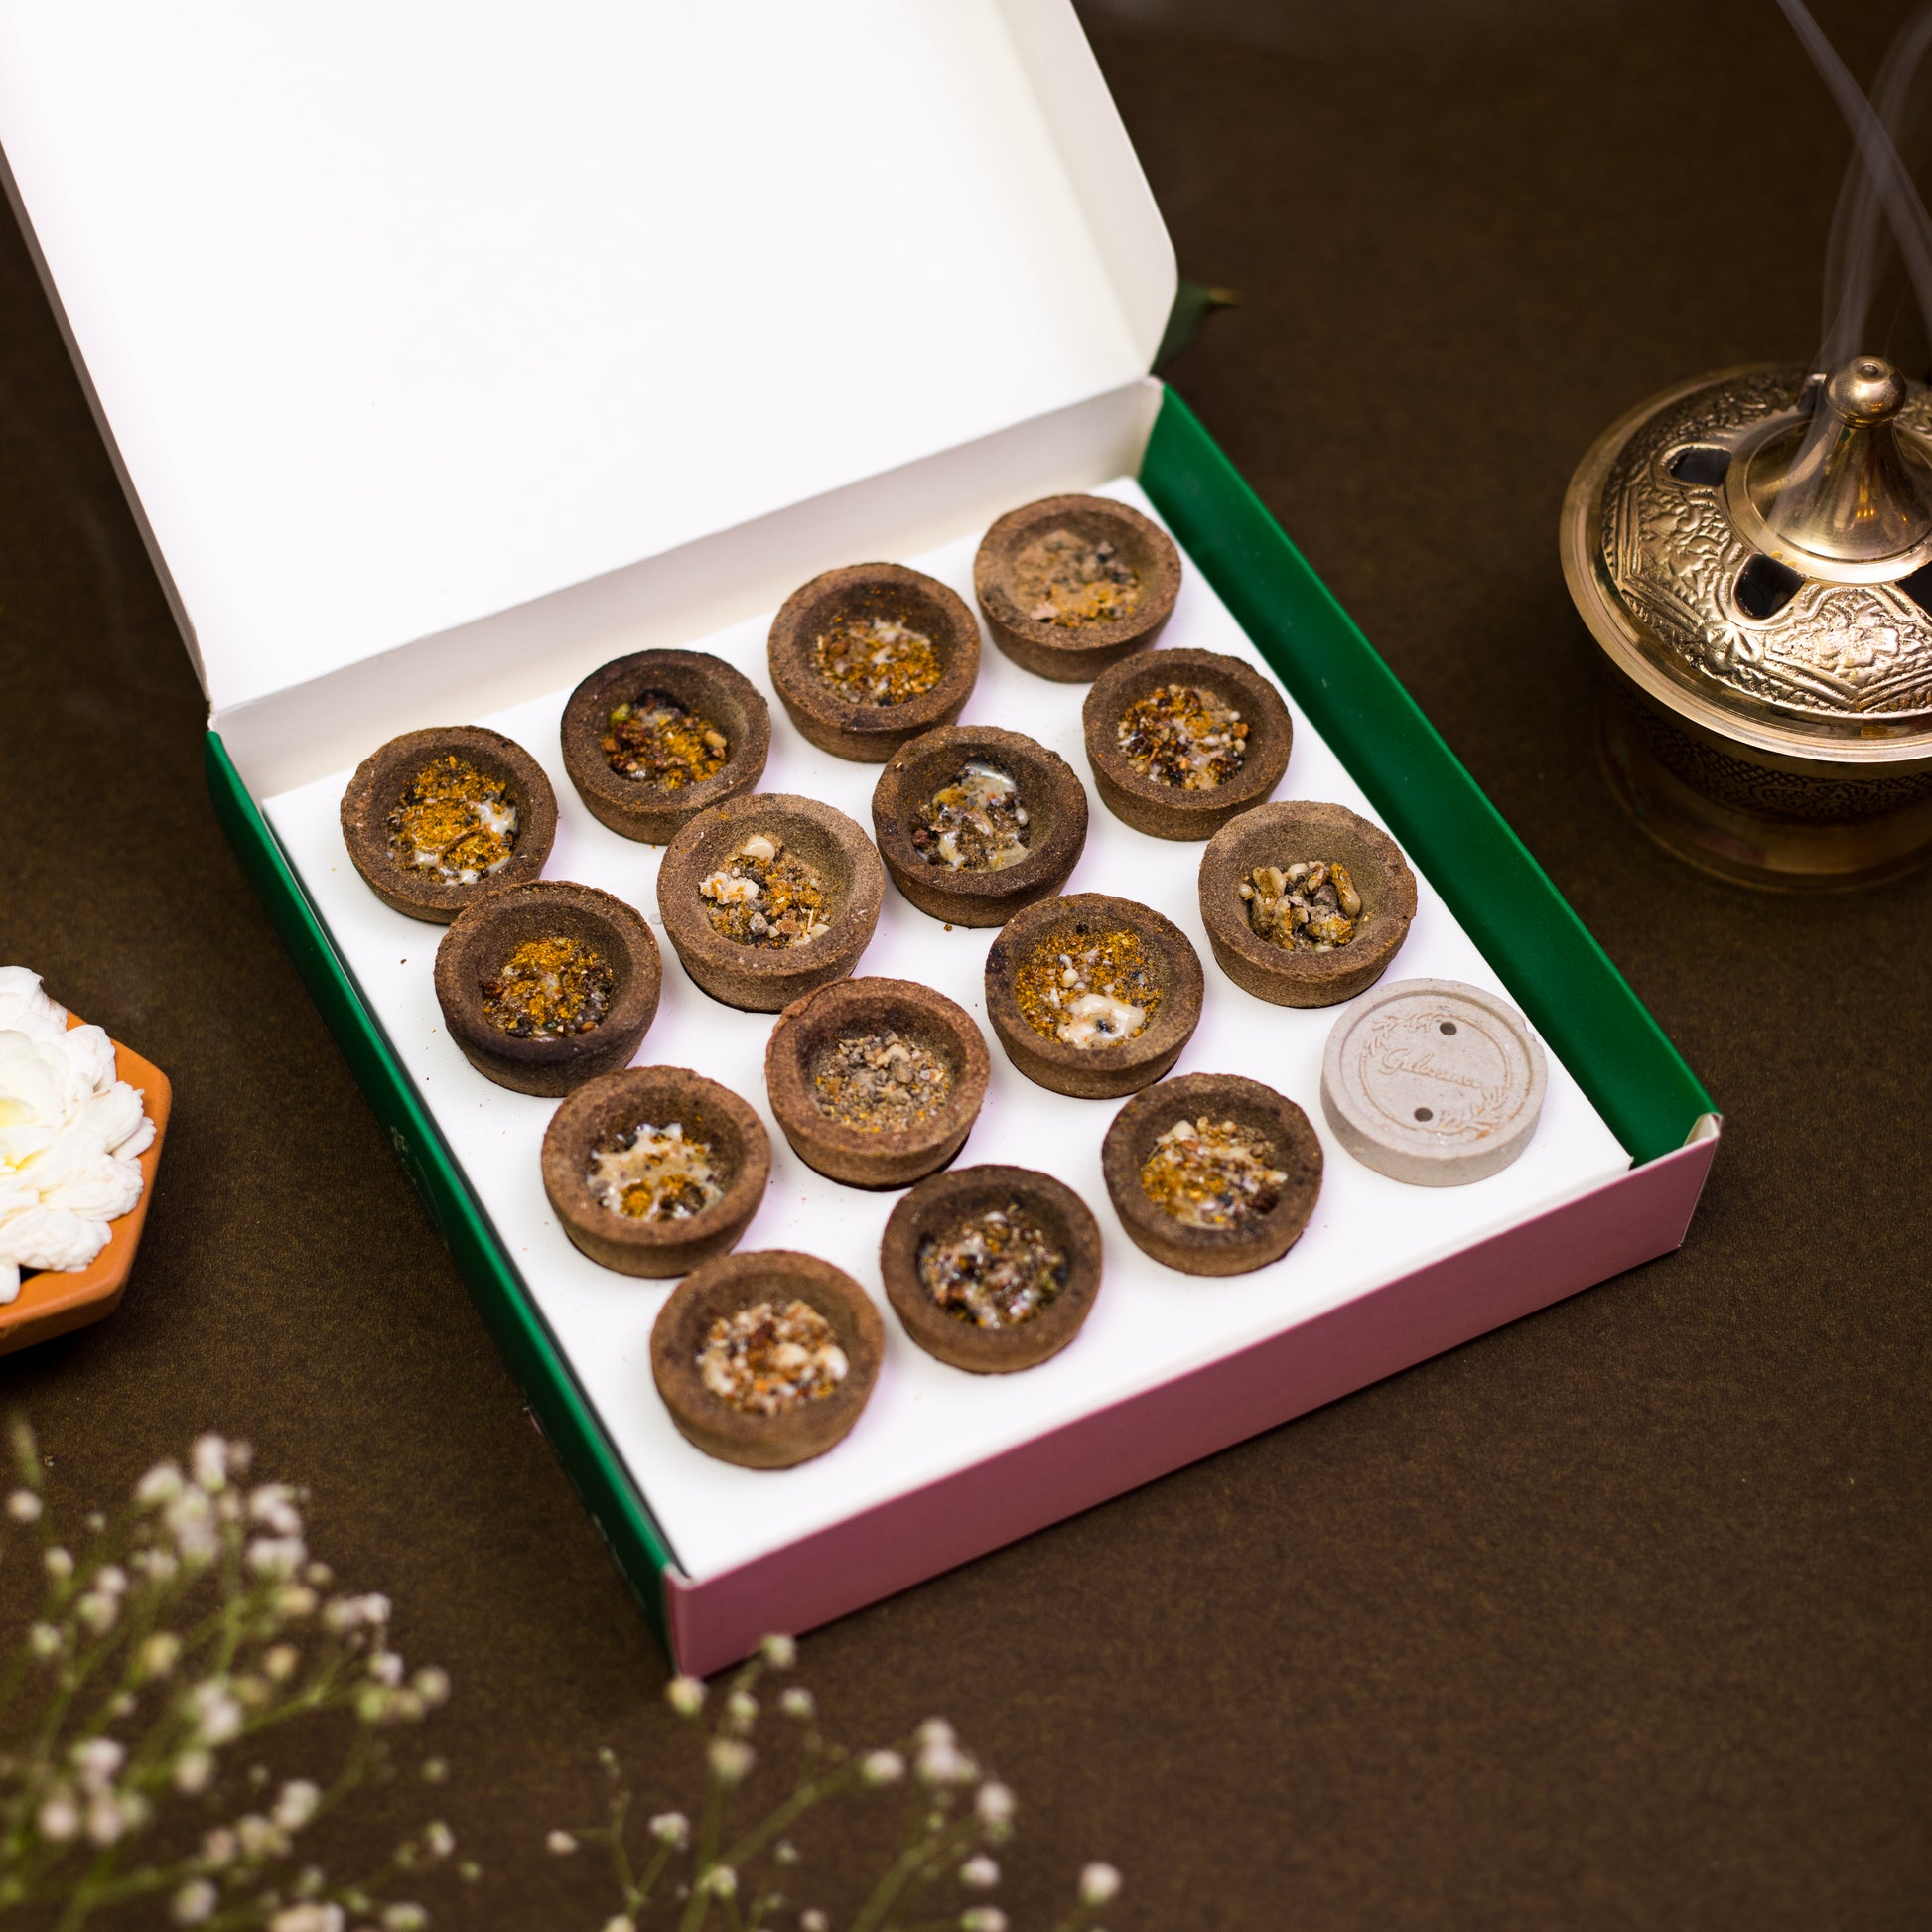 Jasmine Havan Cup & Rose Dhoopsticks - Made from Temple flowers & Cowdung | Combo Boxes | Gulessence - Gulessence